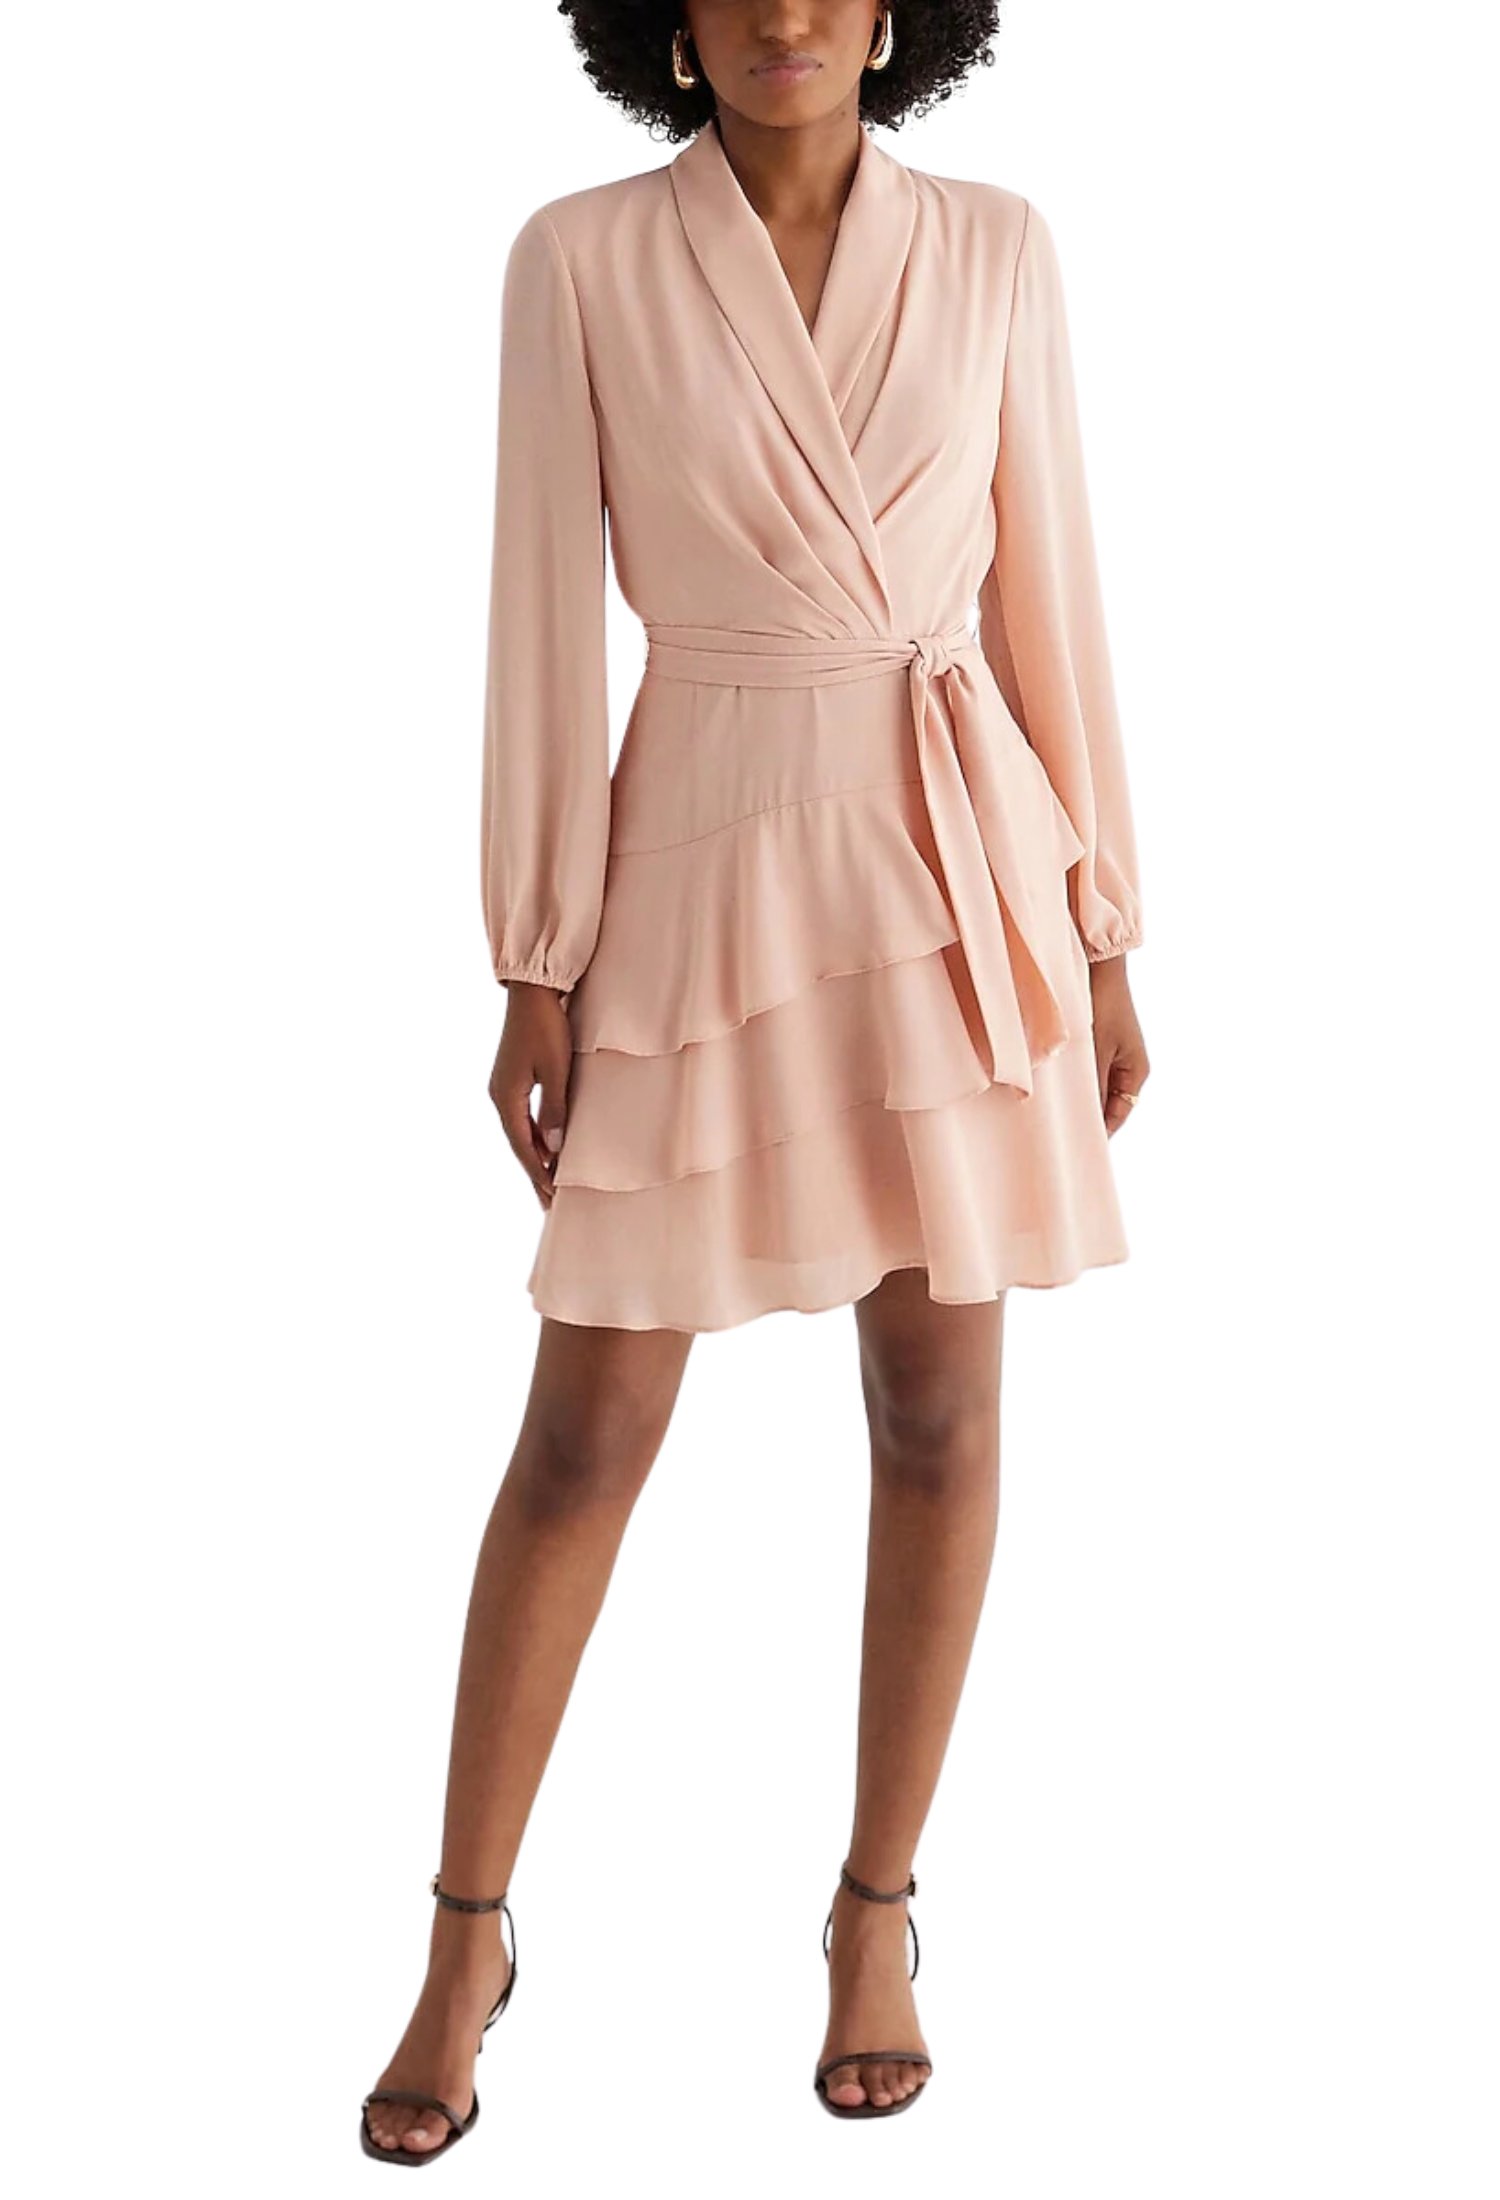 20 Beautiful Dresses You Can Rent To Wear for Easter Celebrations